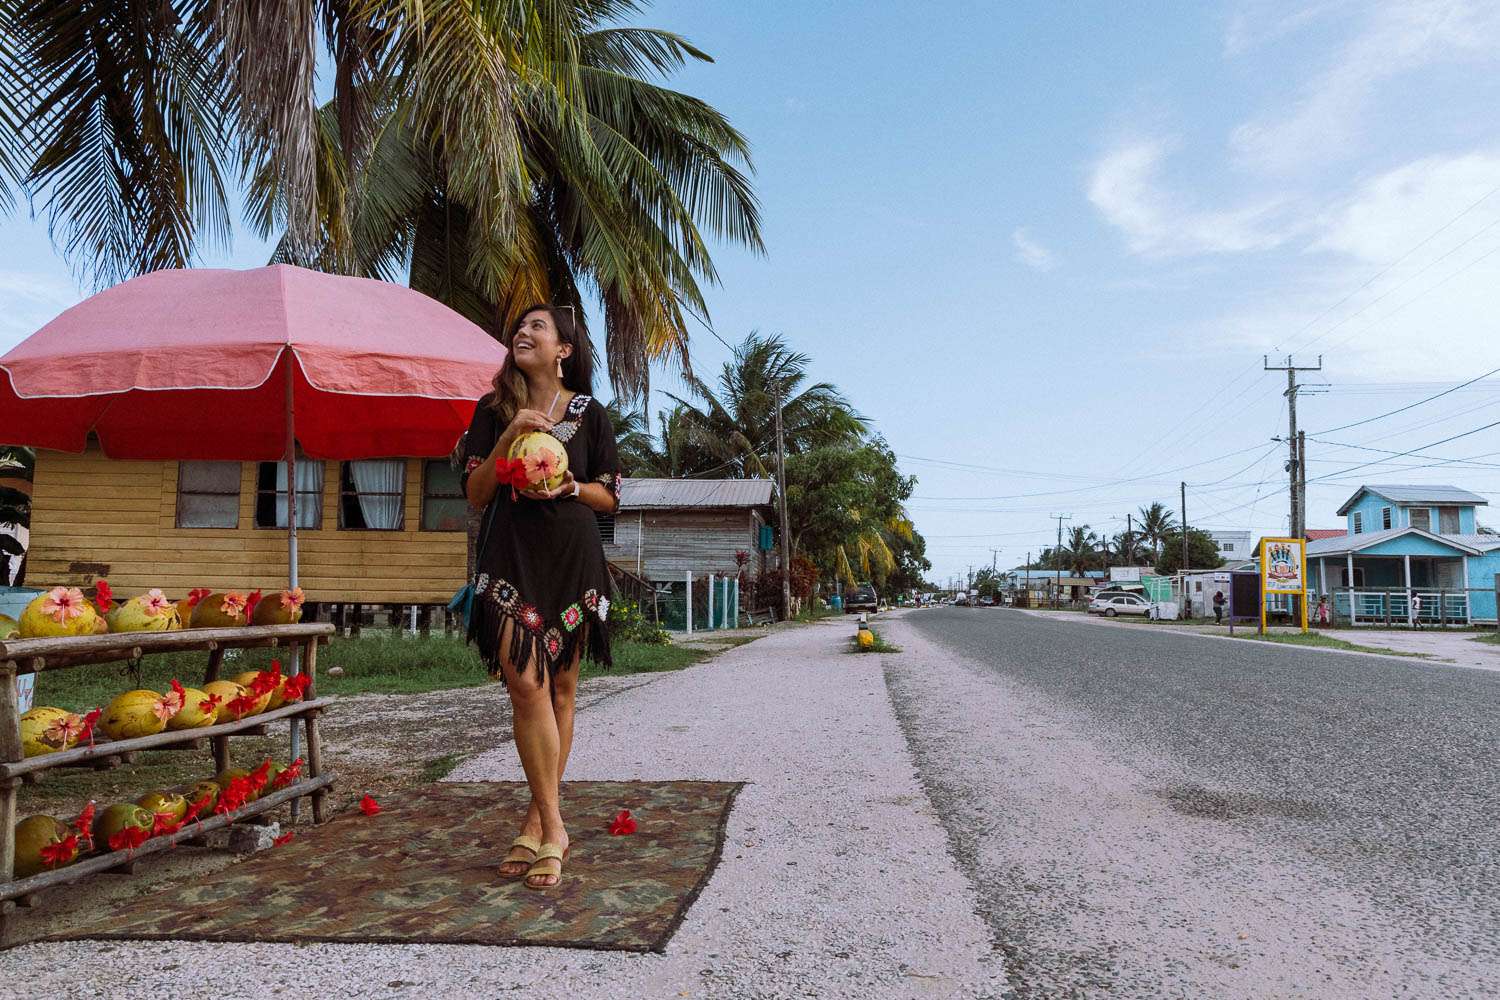 Rachel Off Duty: A Woman Smiling with a Coconut in Placencia, Belize